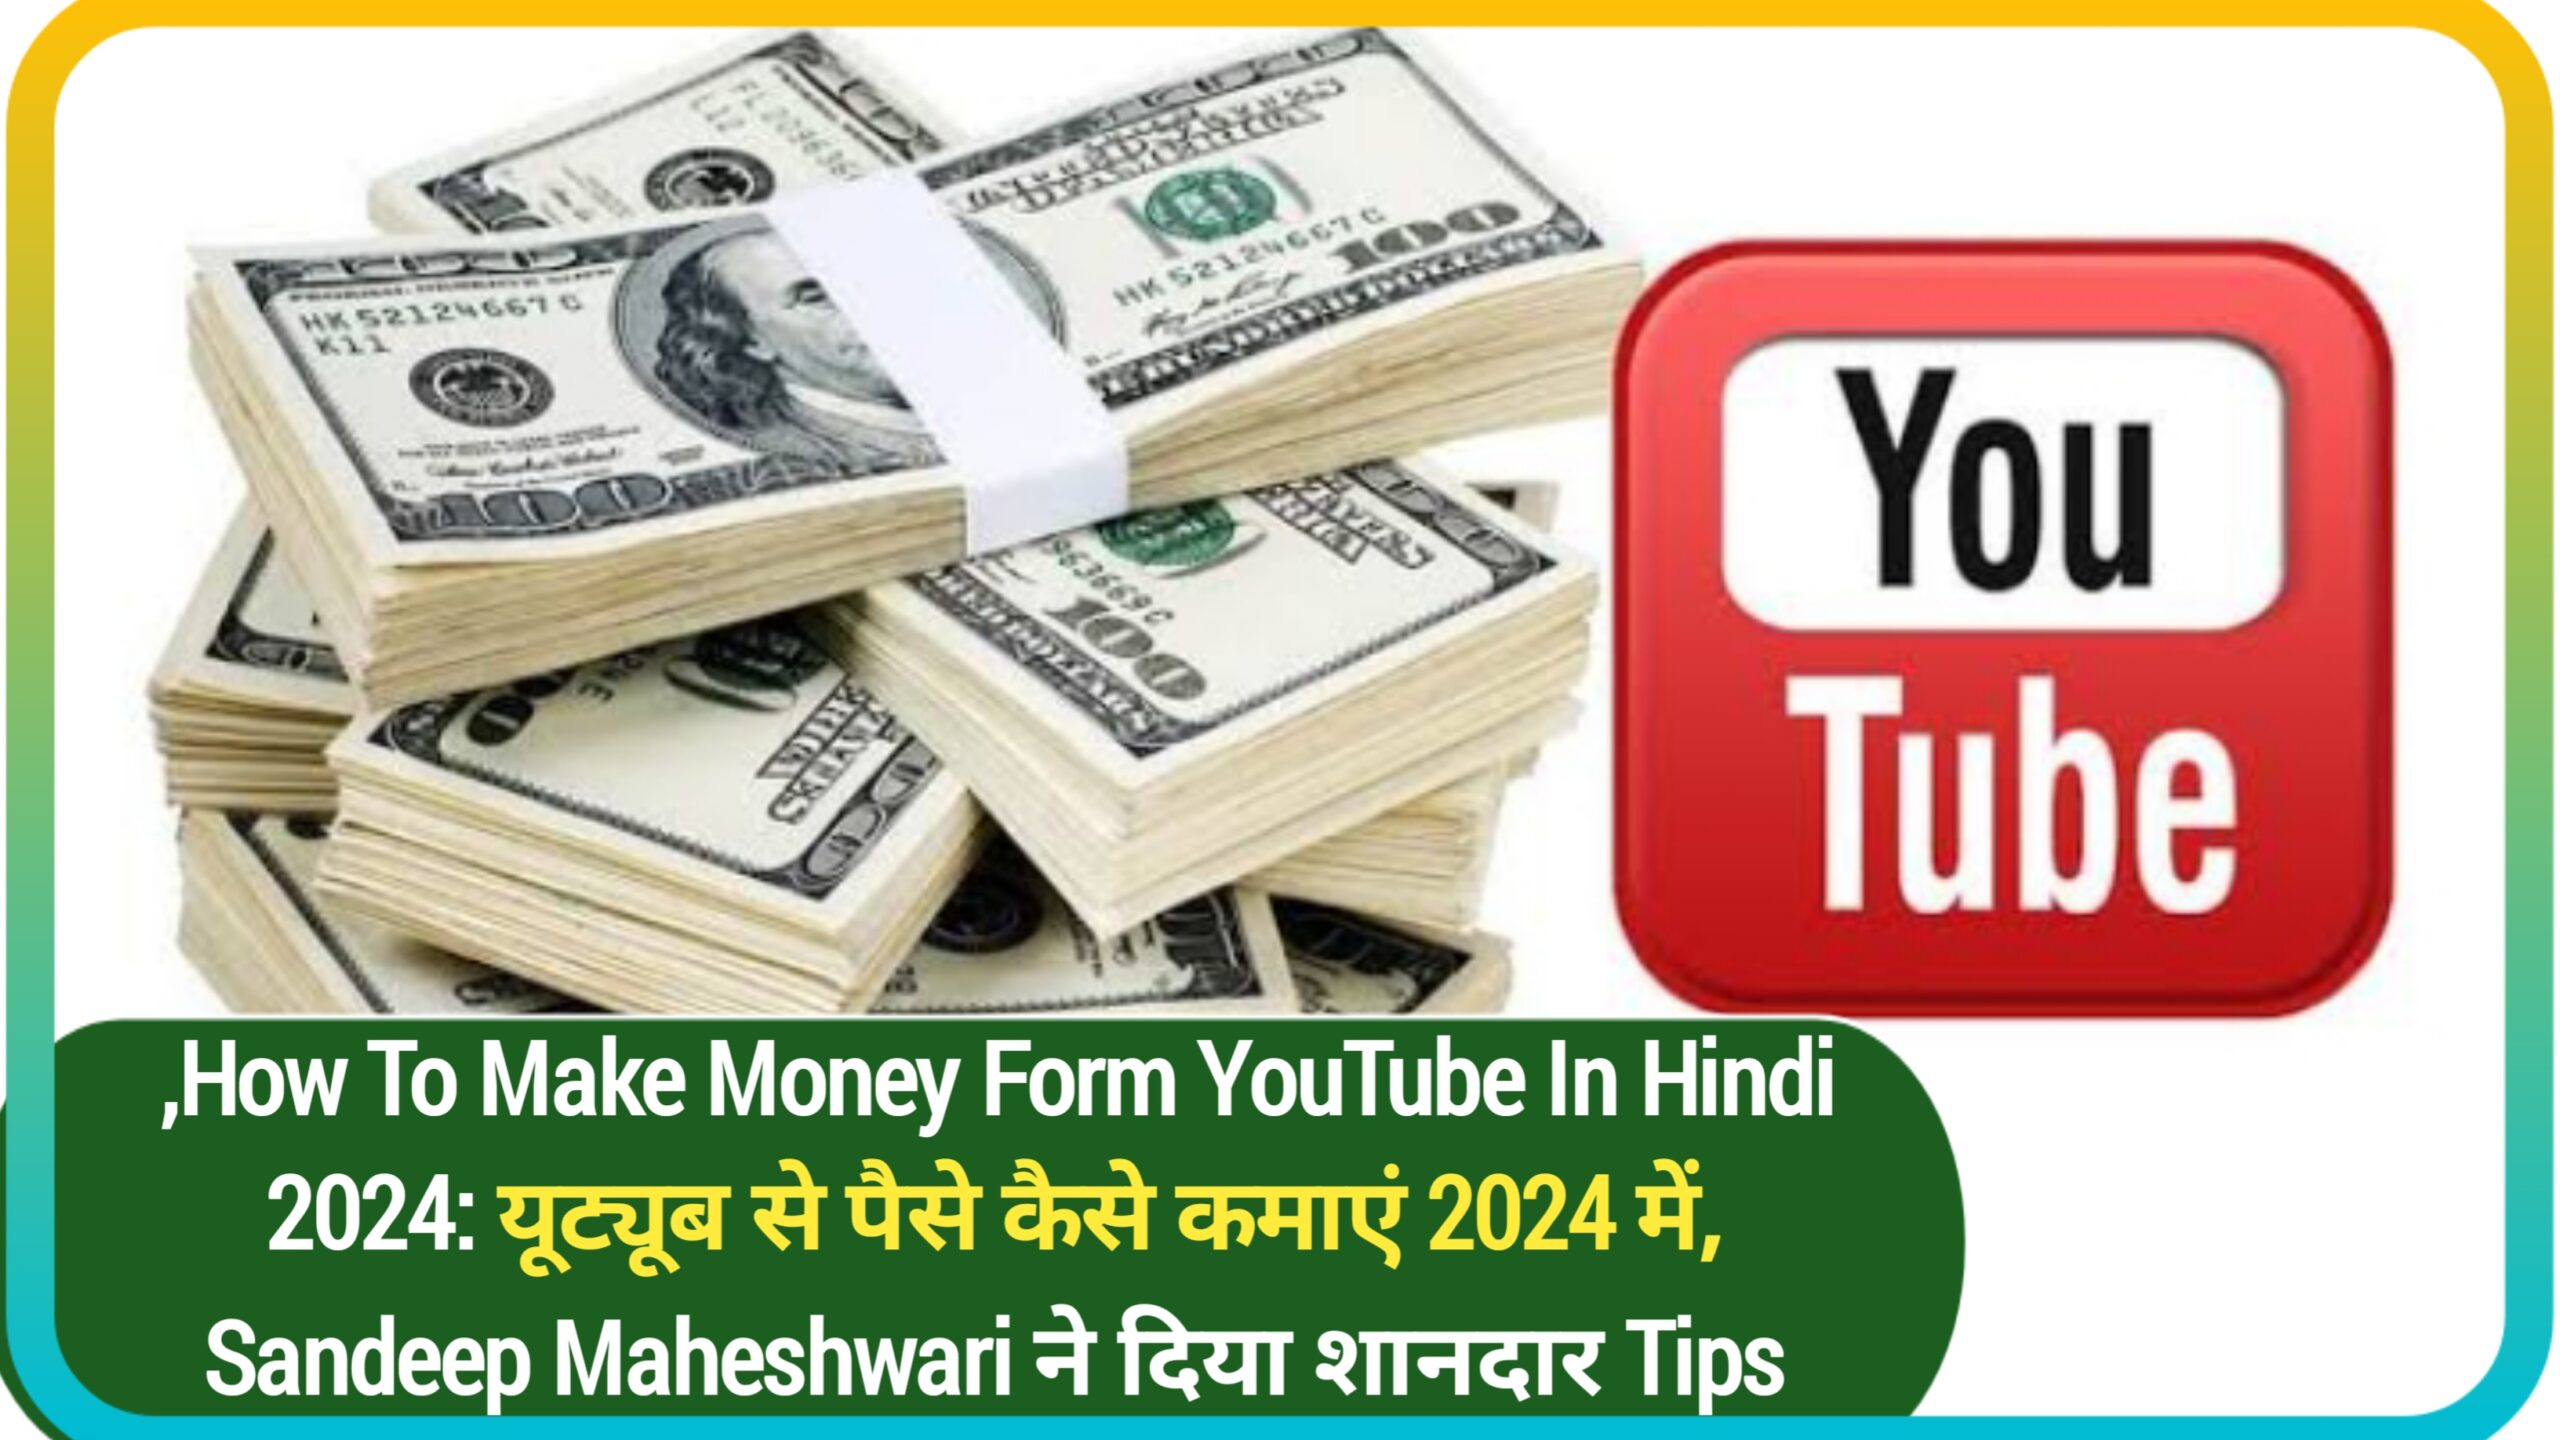 How To Make Money Form YouTube In Hindi 2024